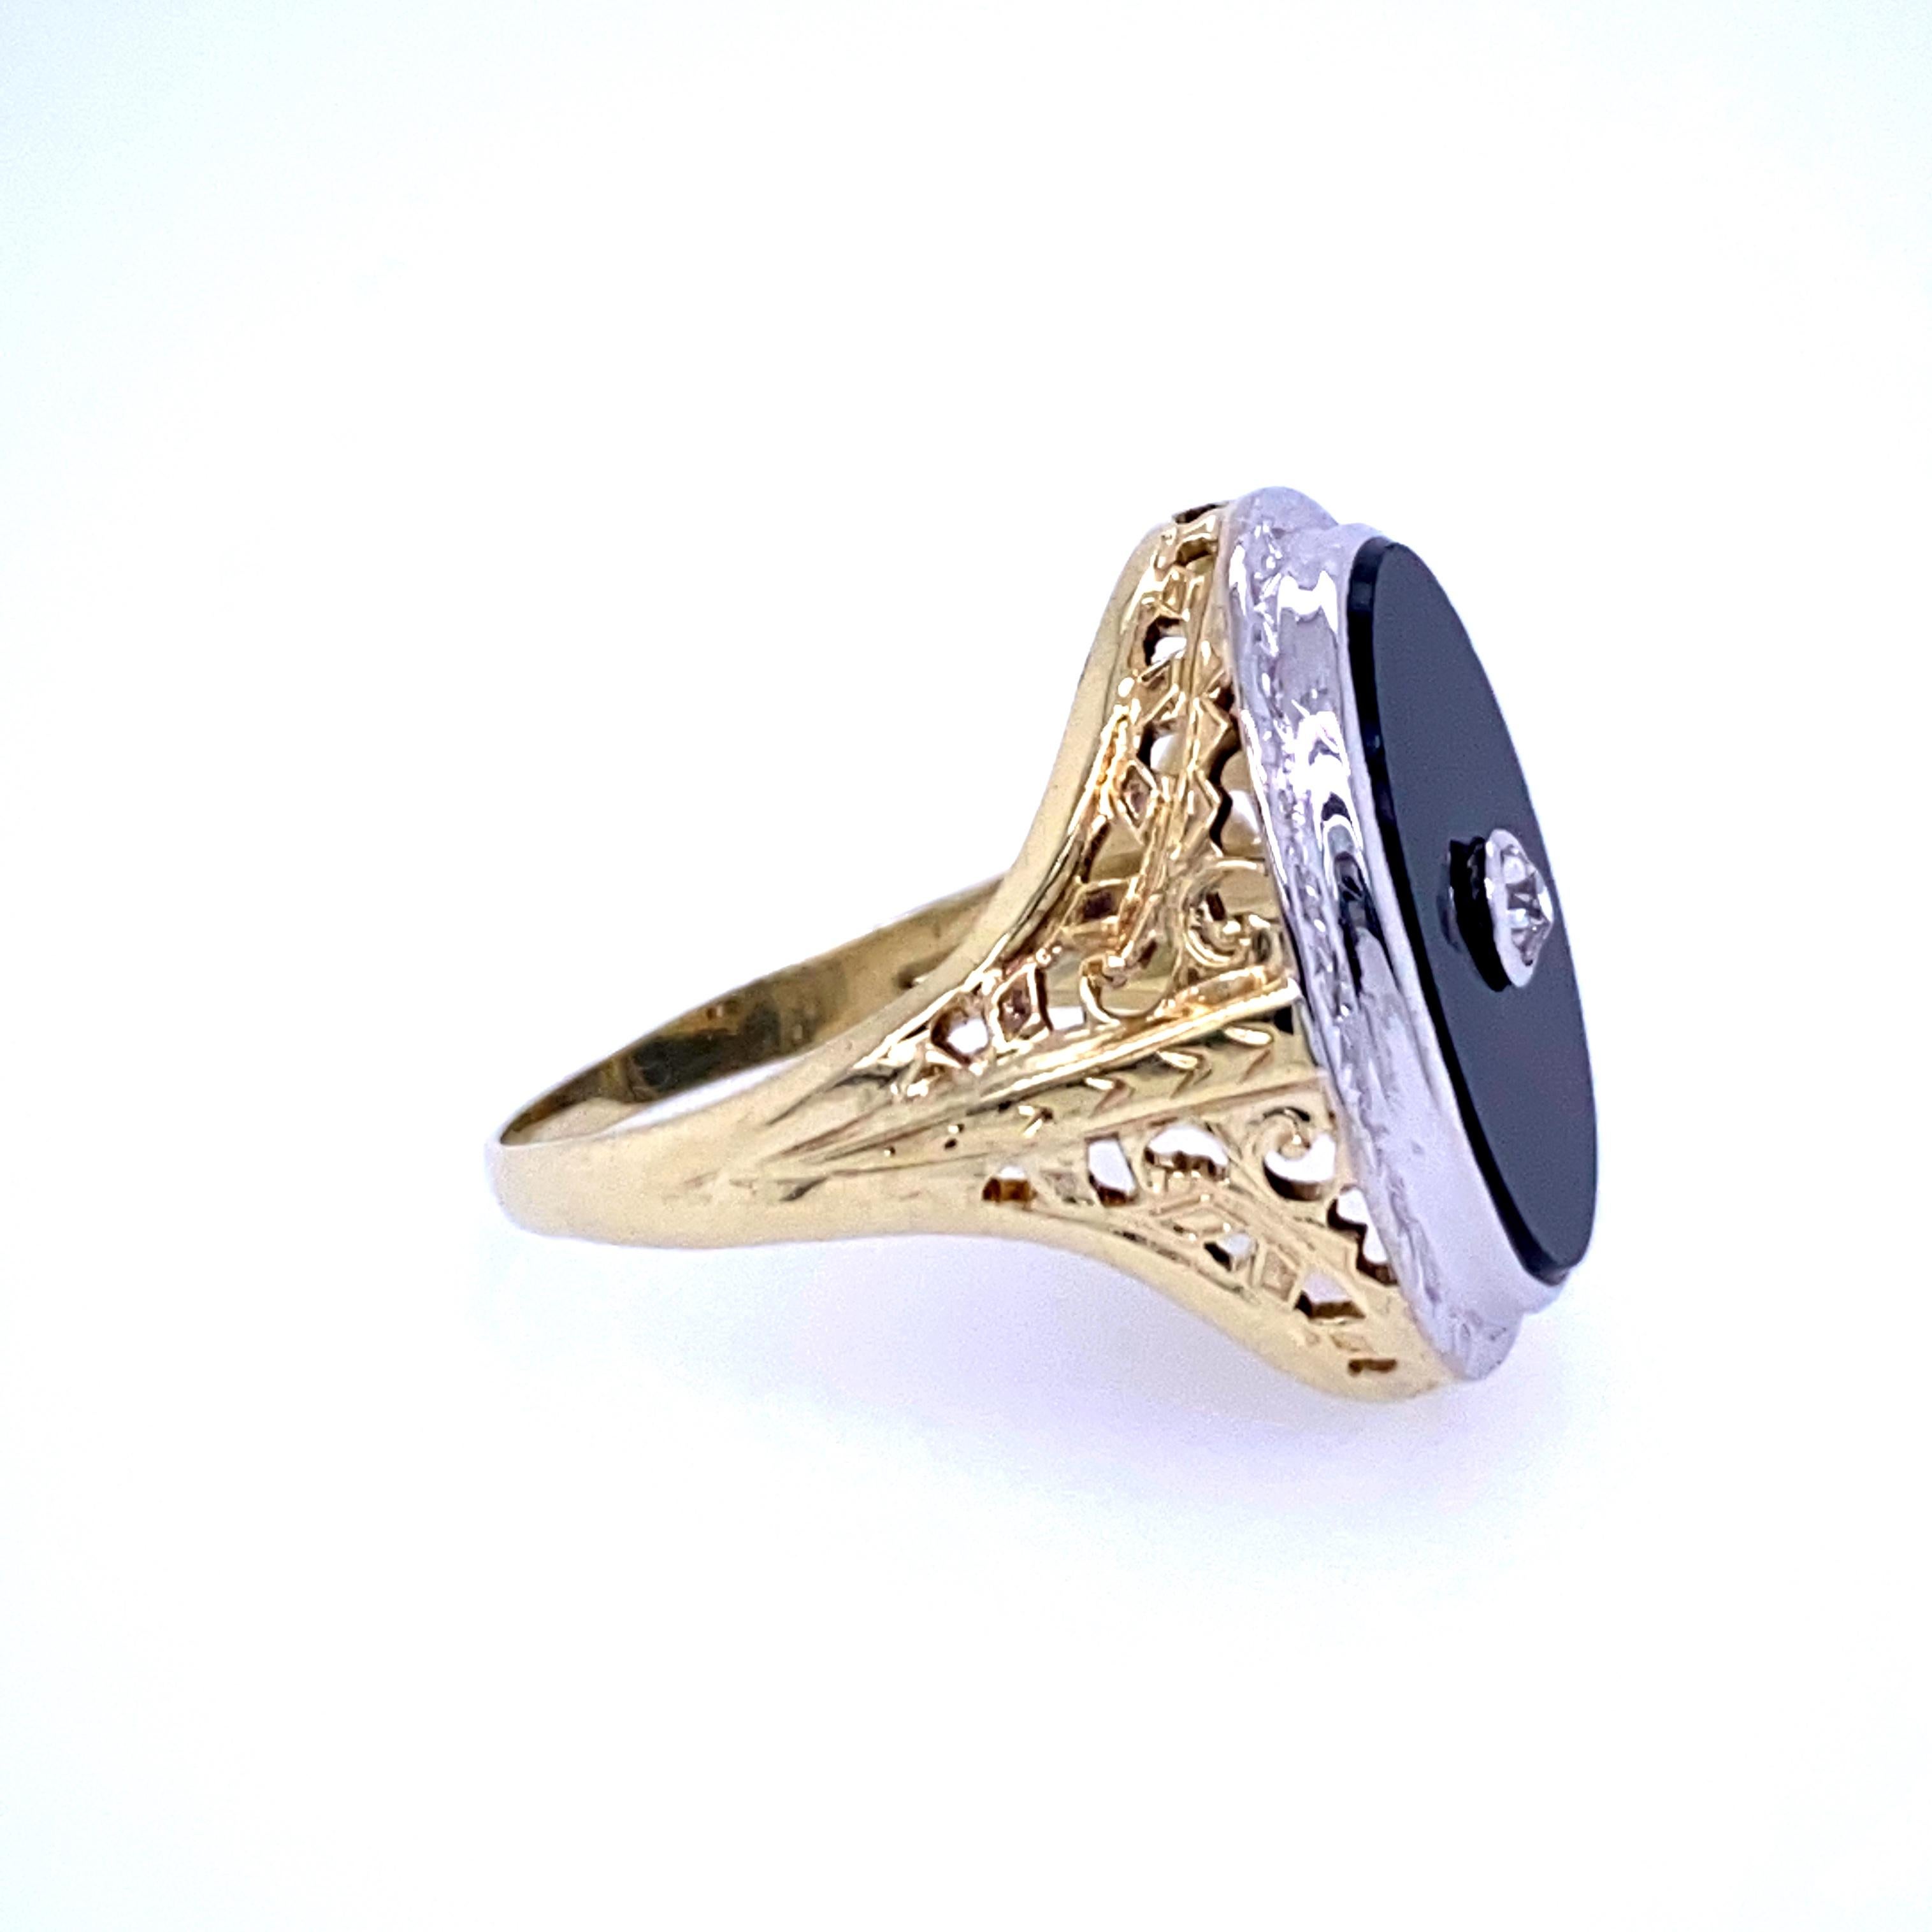 One 14 karat yellow and white gold (stamped 14KT) ring set with one 16.6 x 12.2mm oval onyx in a white gold bezel with one center bezel set Old Mine cut diamond approximately 0.06 carat. The yellow gold filigree shank measures 5.2mm near the top of